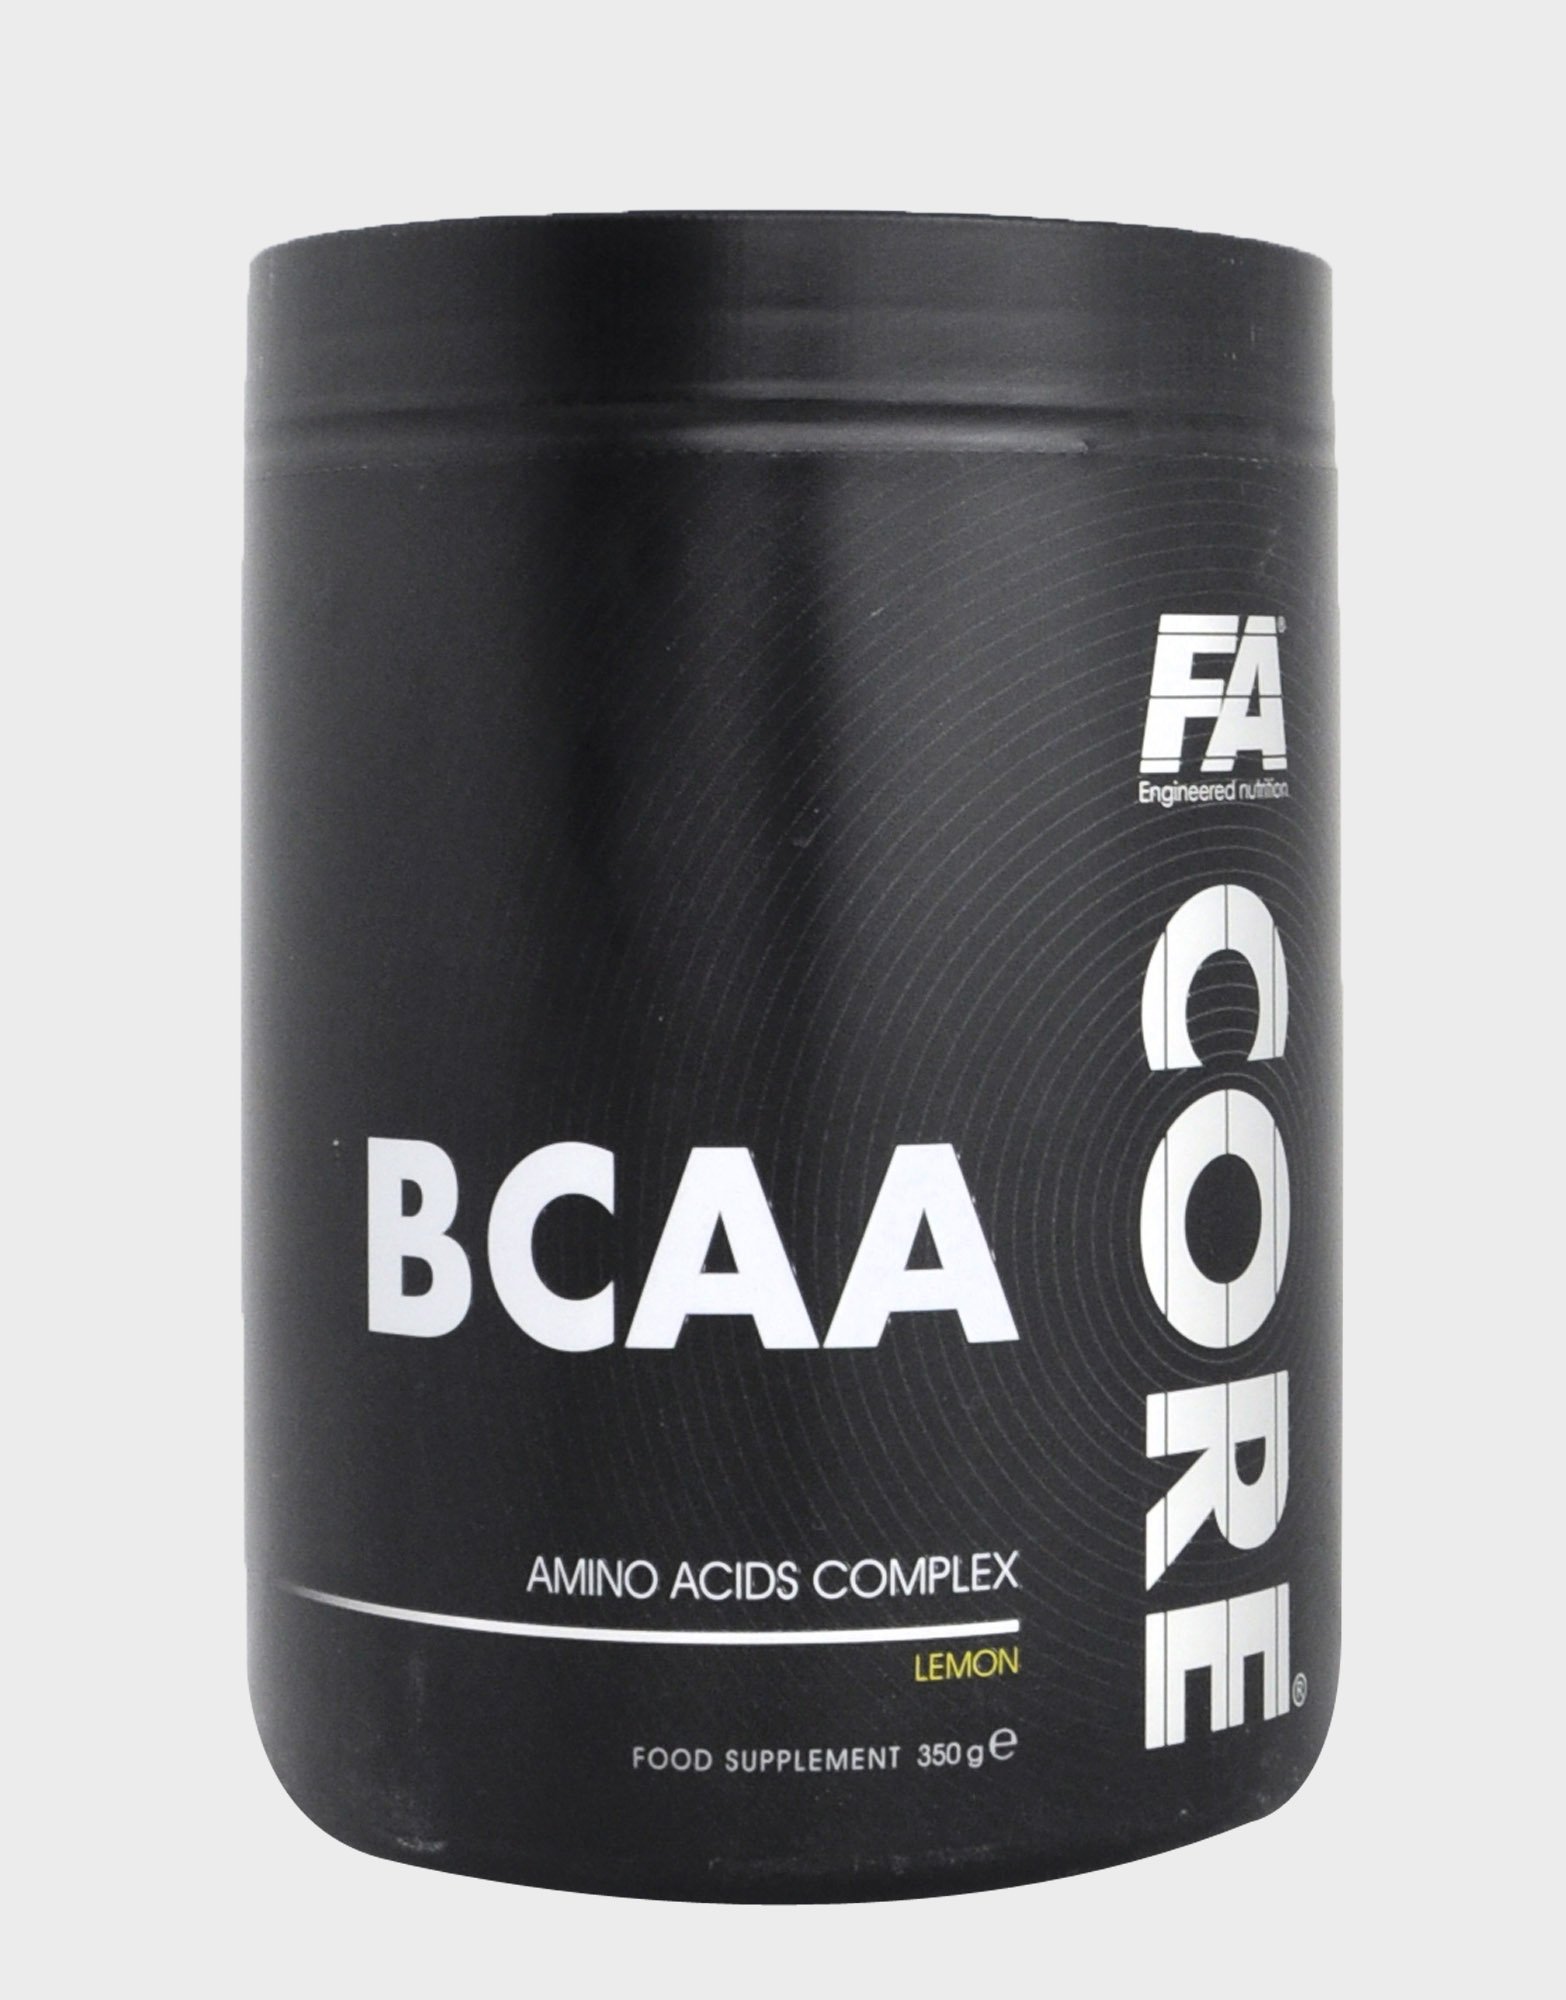 BCAA Core, 350 g, Fitness Authority. BCAA. Weight Loss recovery Anti-catabolic properties Lean muscle mass 